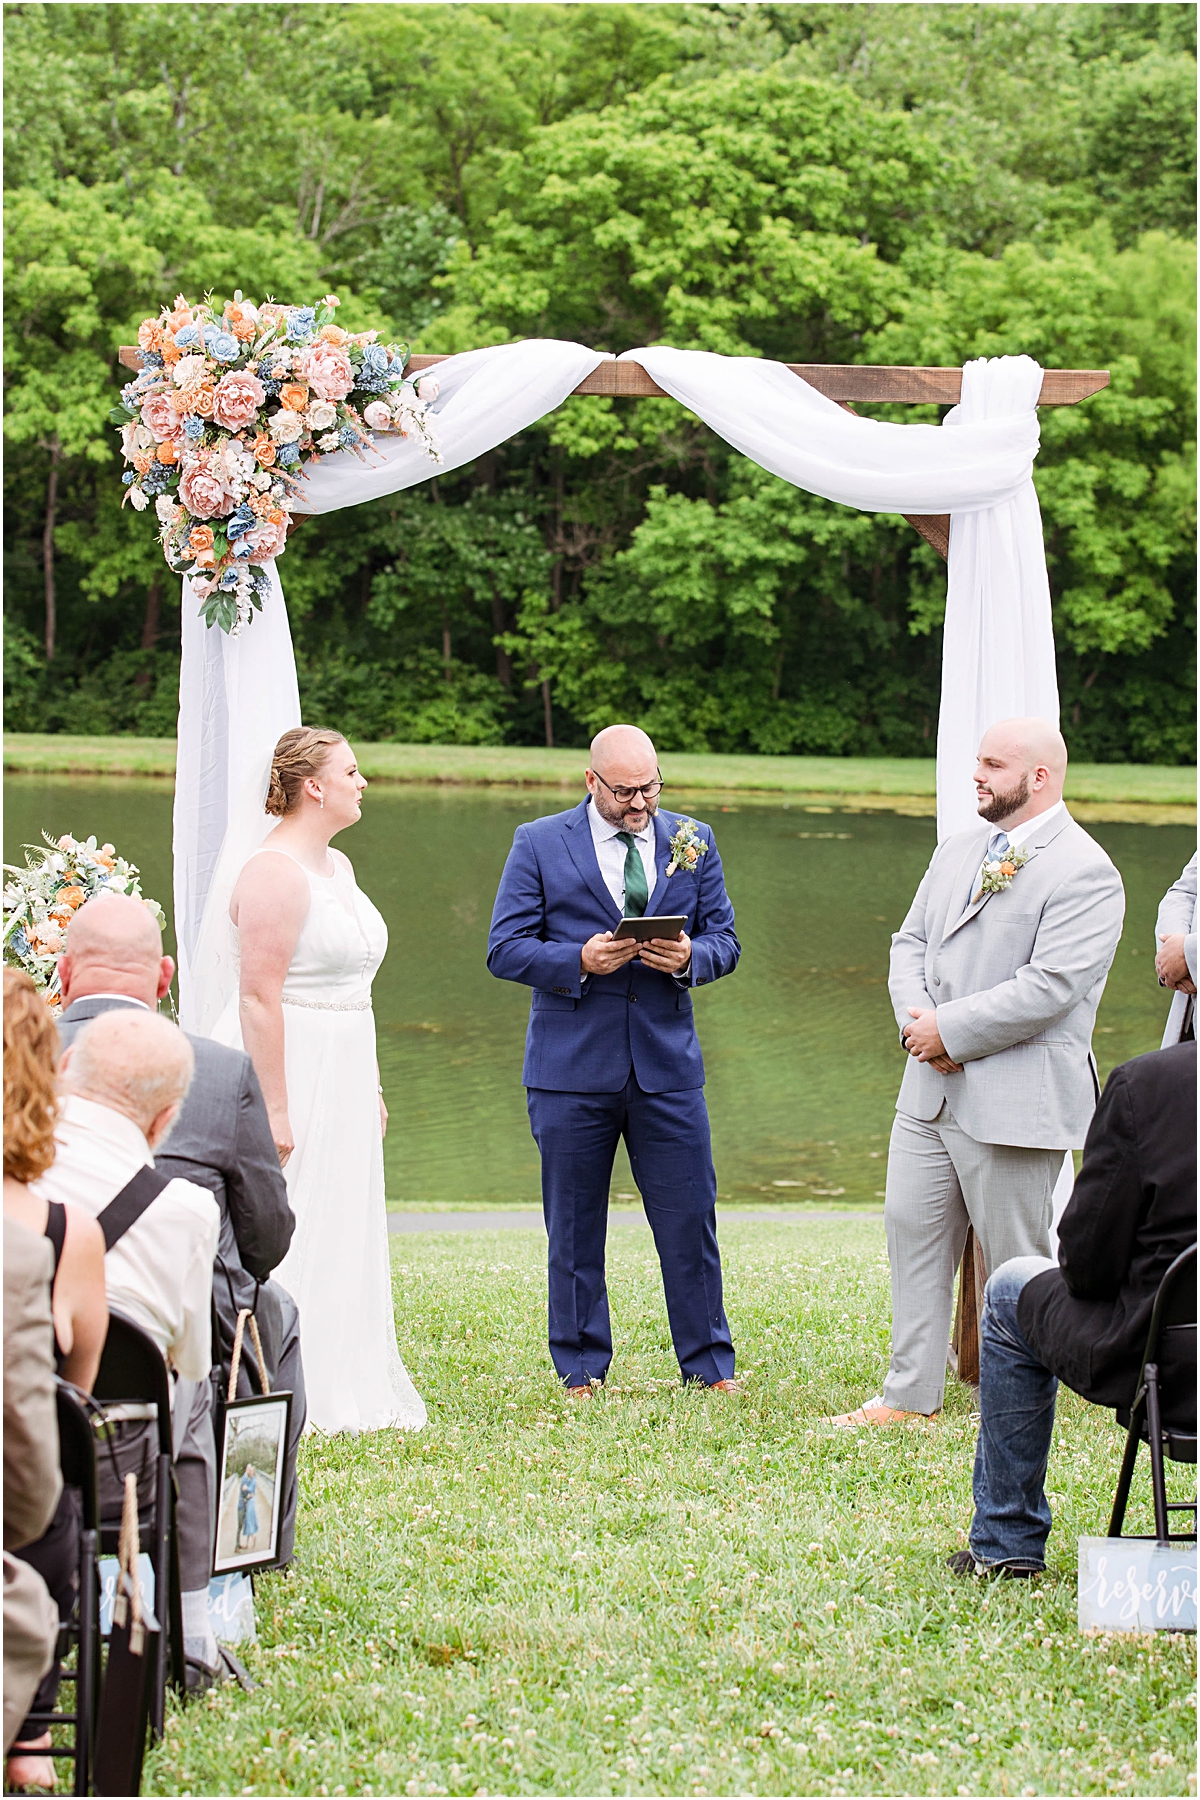 The bride and groom looking longingly at each other as they stand at the altar while their officiant starts their ceremony.